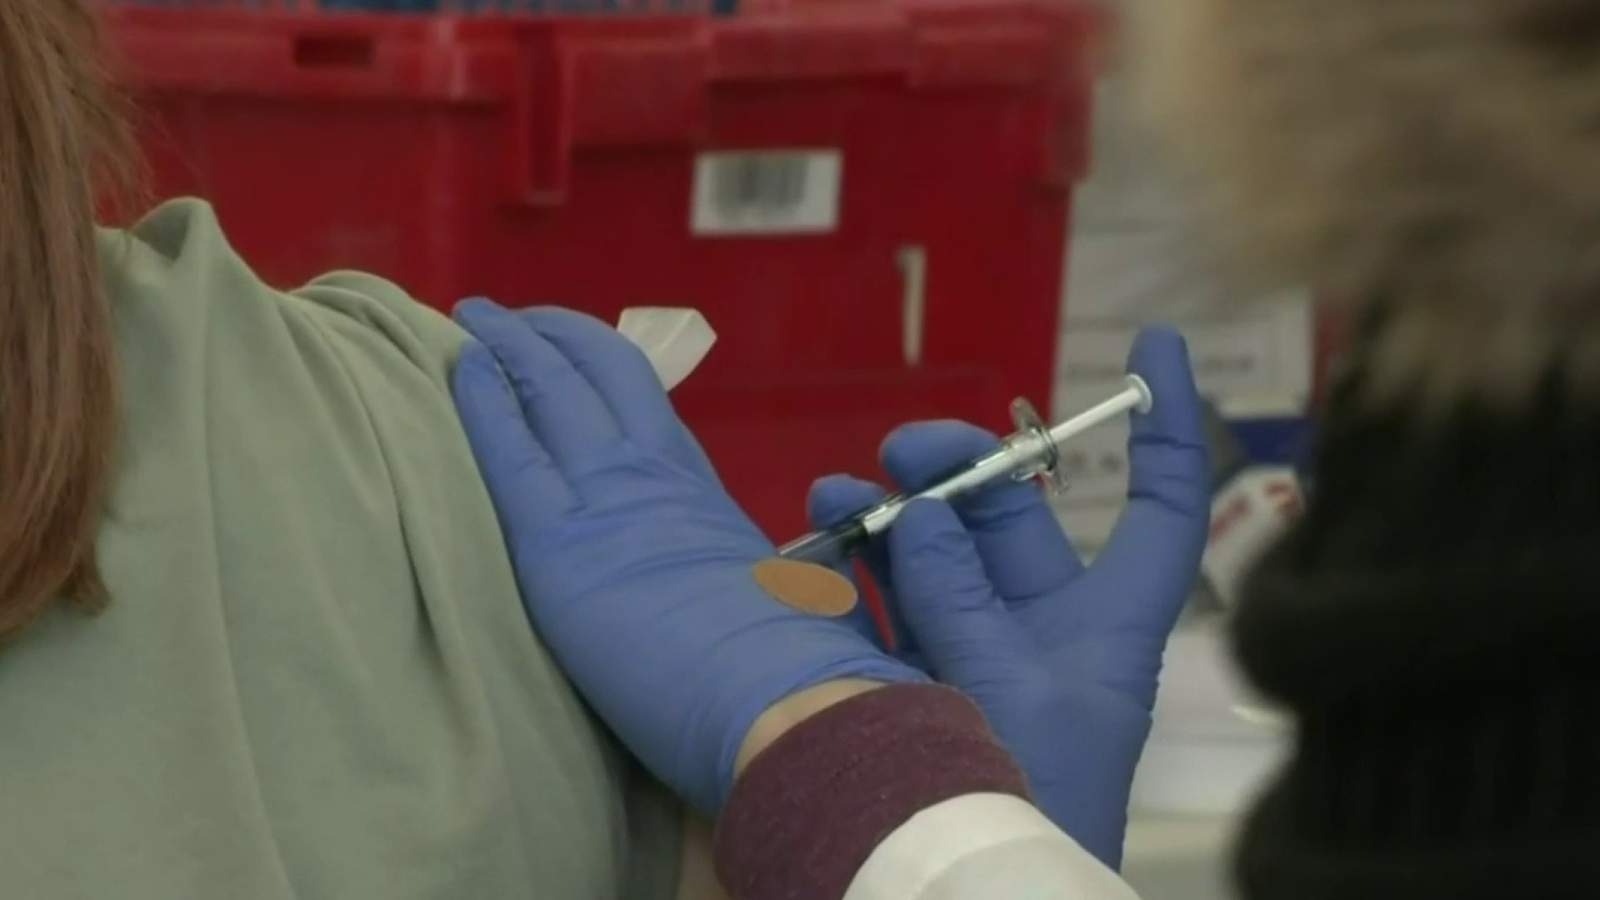 Officials: Michigan virus vaccine rollout on track, federal help coming